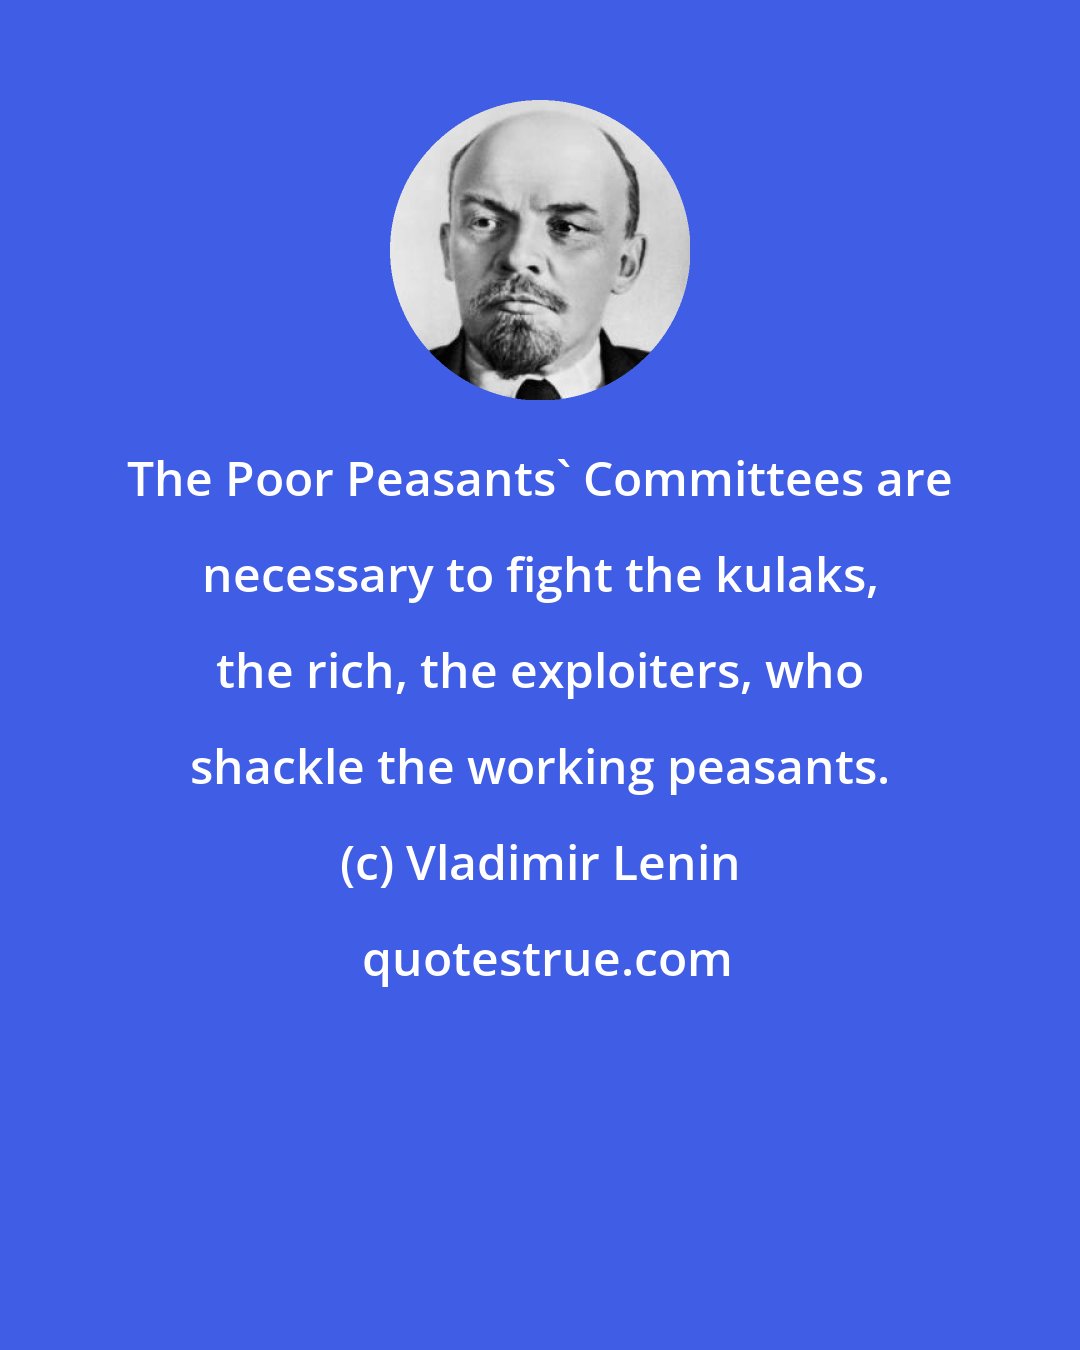 Vladimir Lenin: The Poor Peasants' Committees are necessary to fight the kulaks, the rich, the exploiters, who shackle the working peasants.